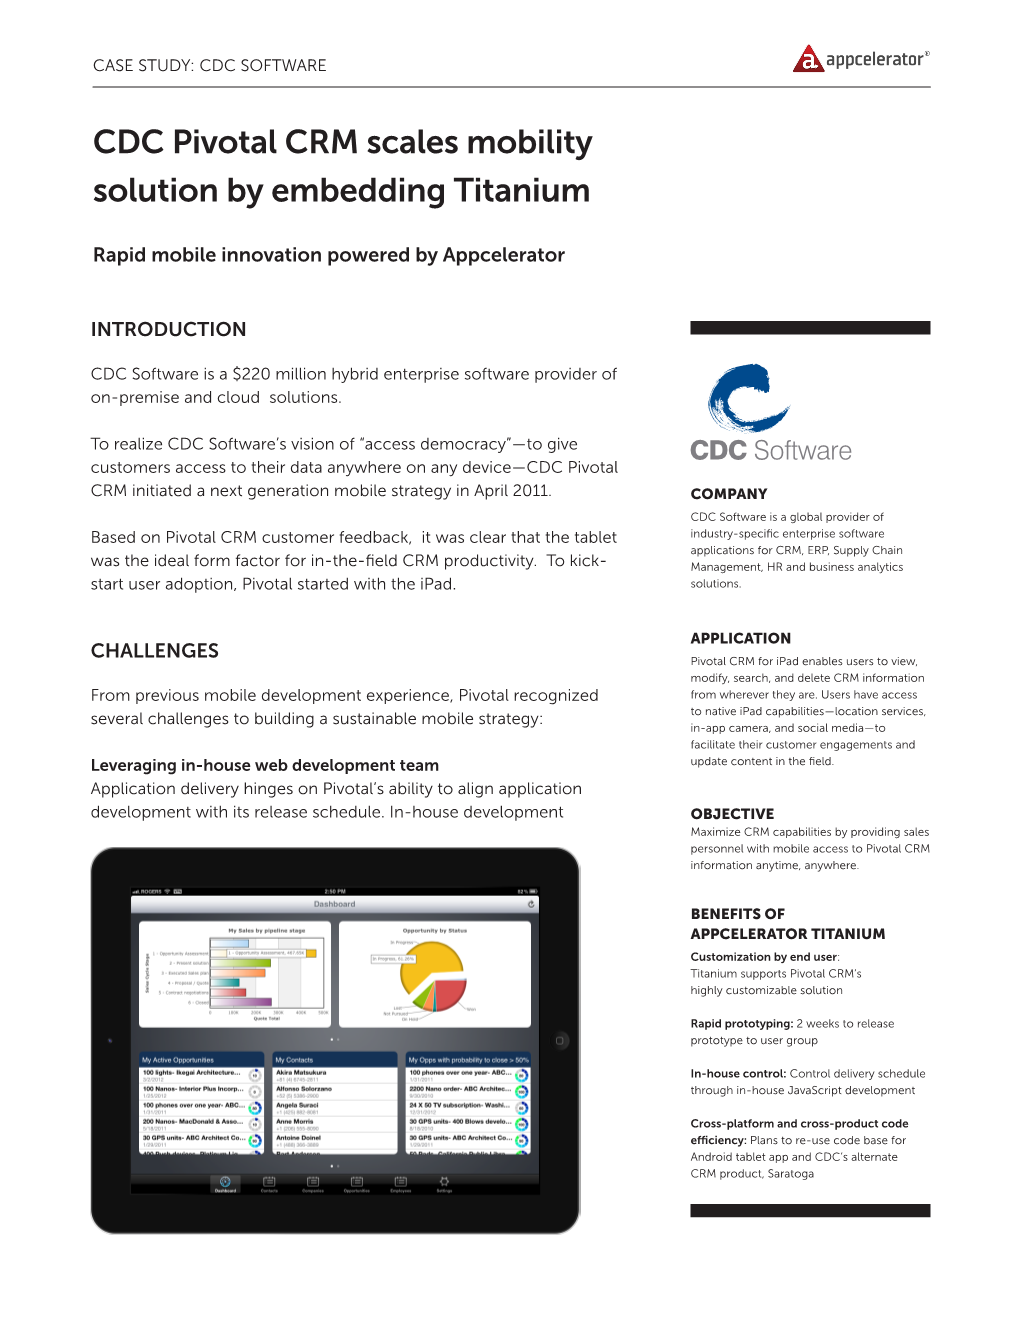 CDC Pivotal CRM Scales Mobility Solution by Embedding Titanium